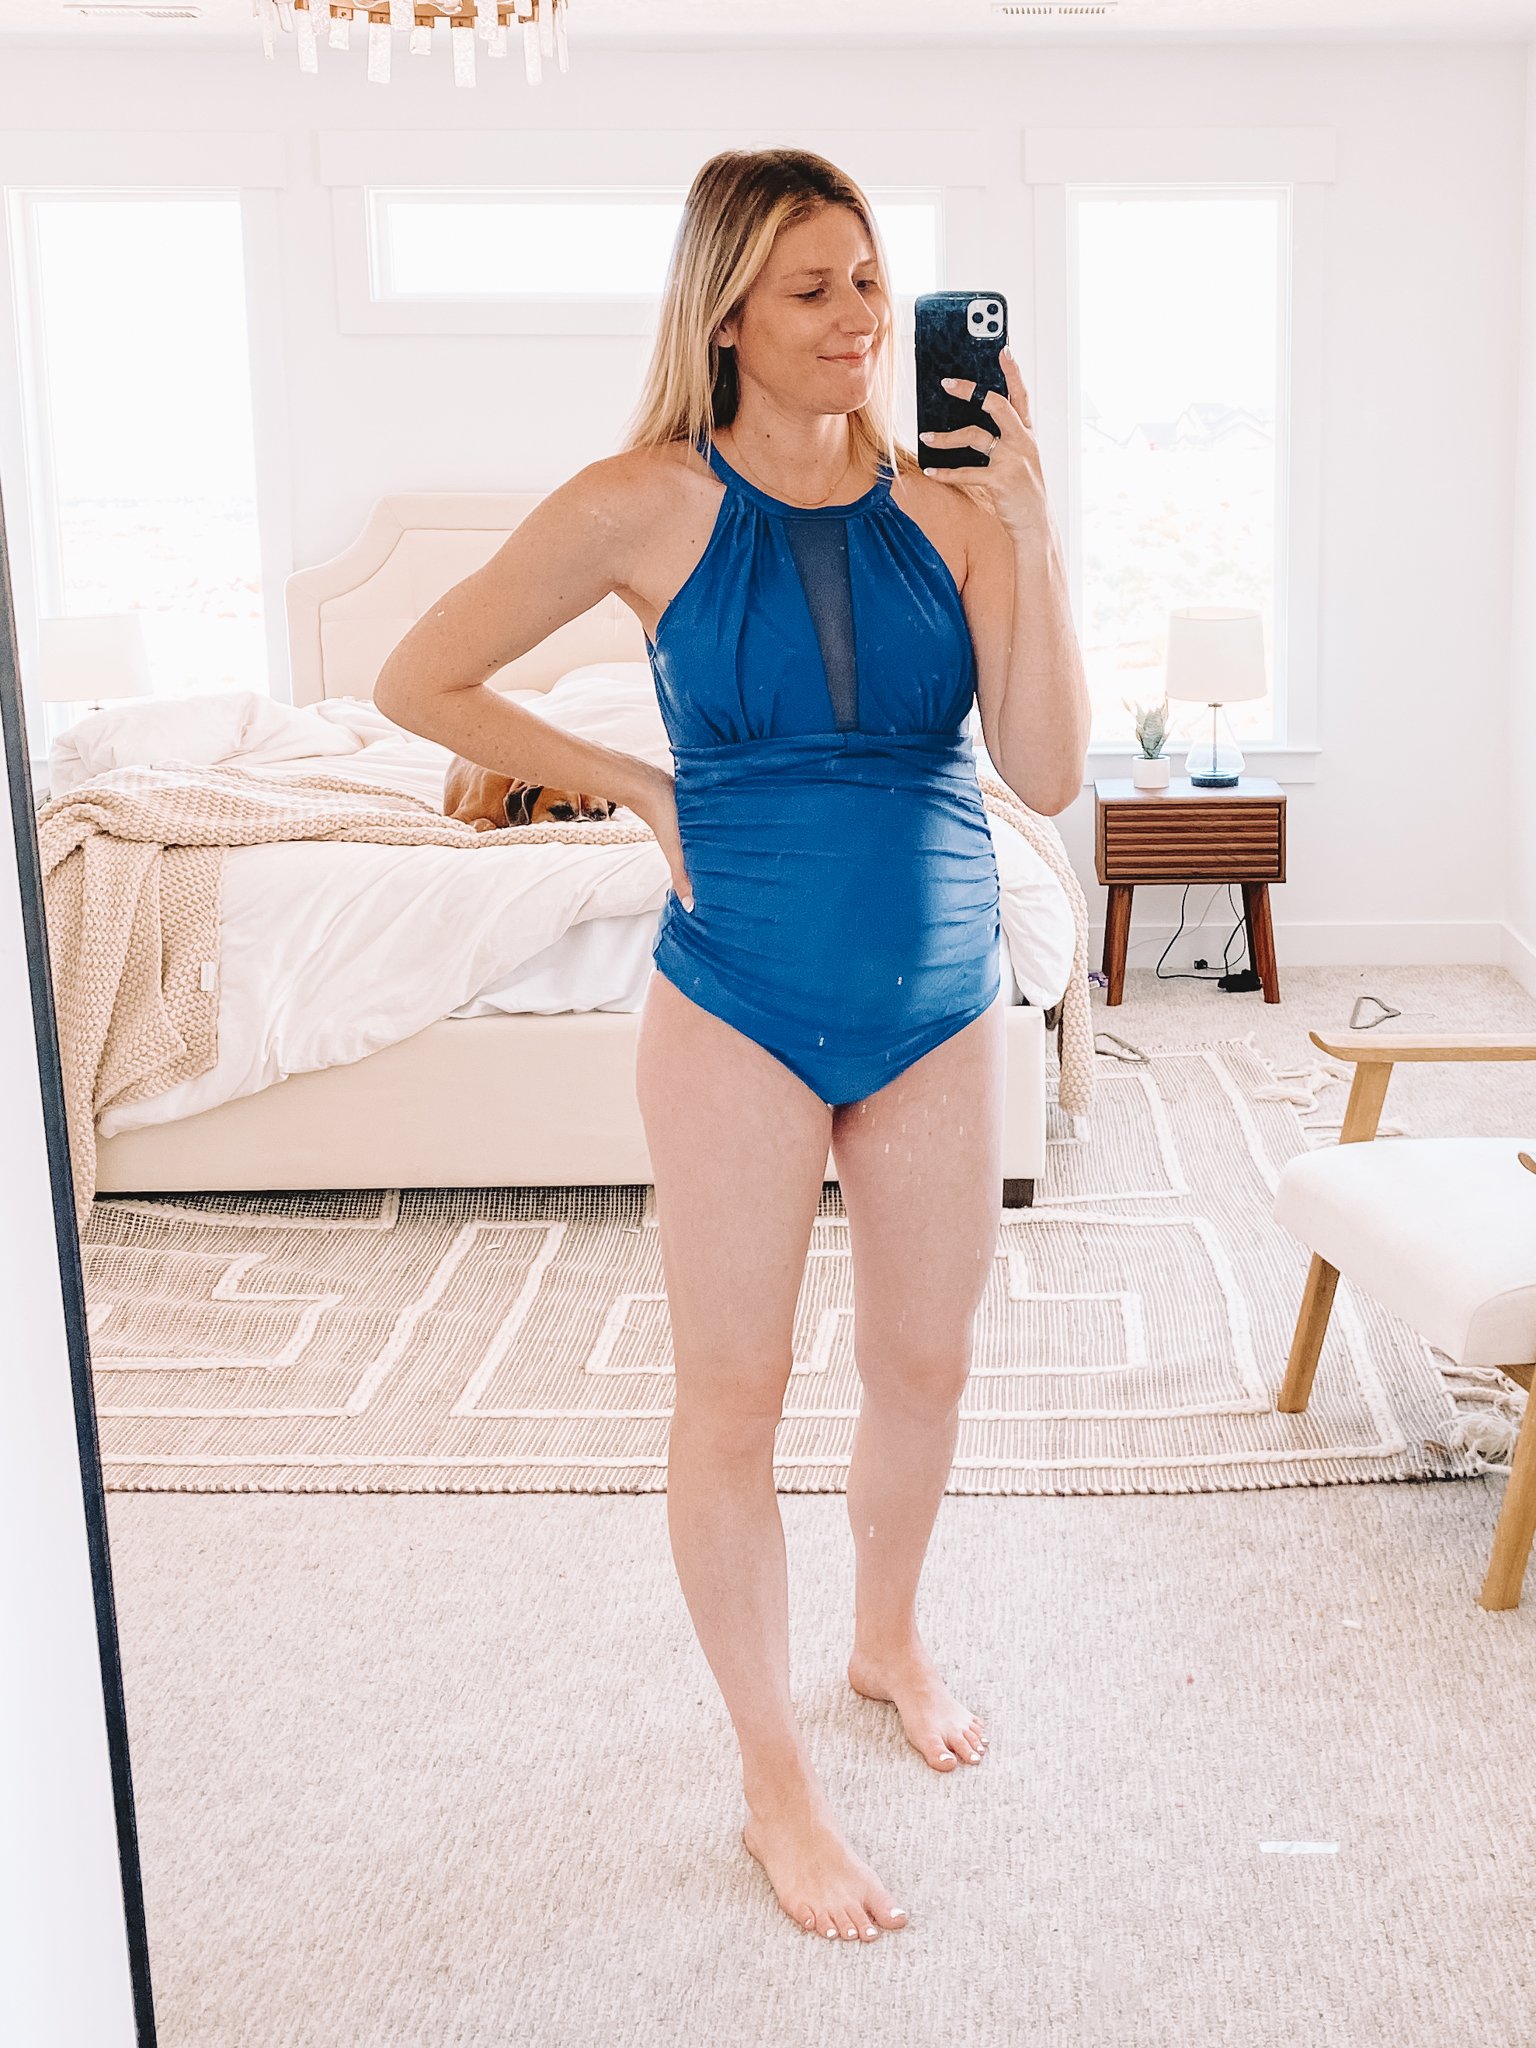 11 Bump-Friendly One Piece Swimsuits